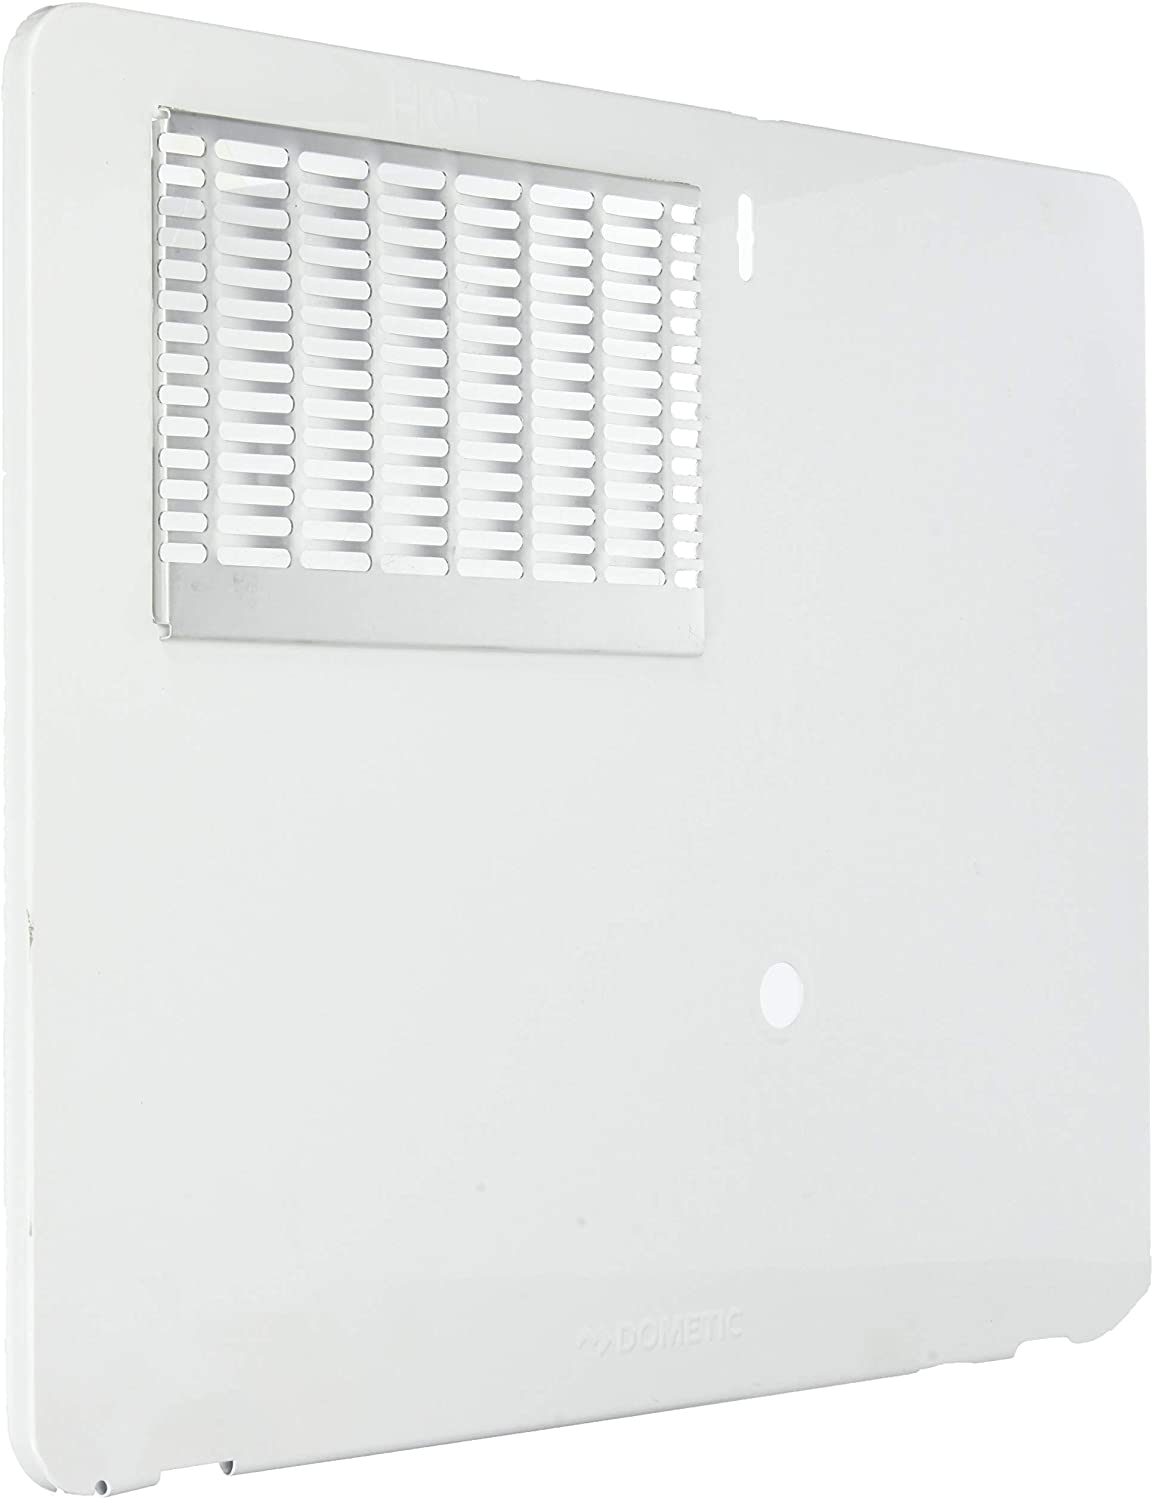 Dometic Atwood 91386  6 Gallon Water Heater Door, White